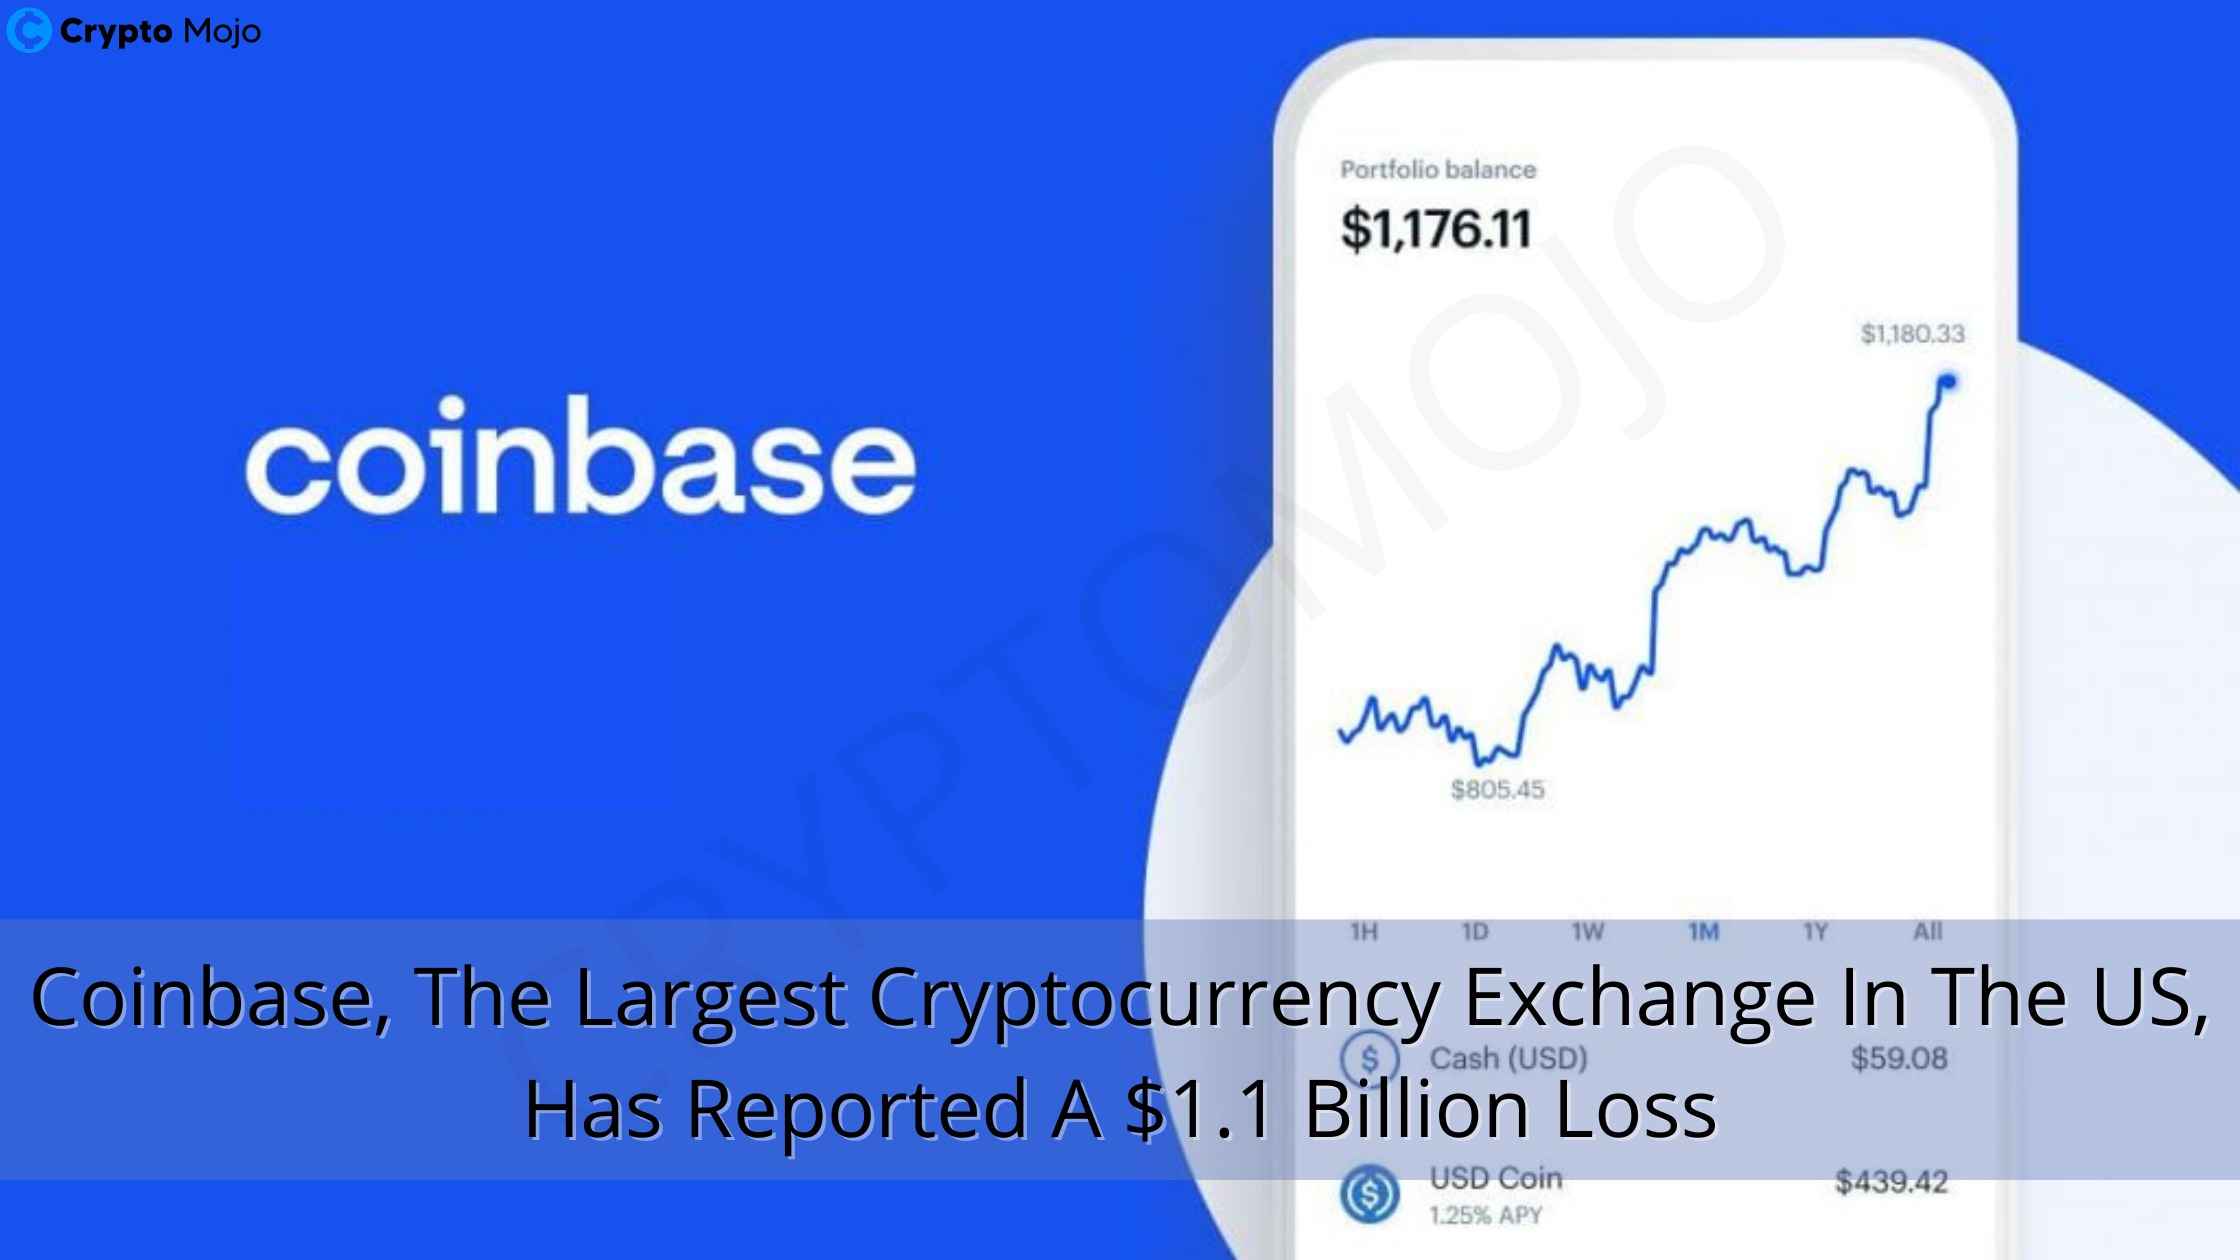 Coinbase, The Largest Cryptocurrency Exchange In The US, Has Reported A $1.1 Billion Loss!